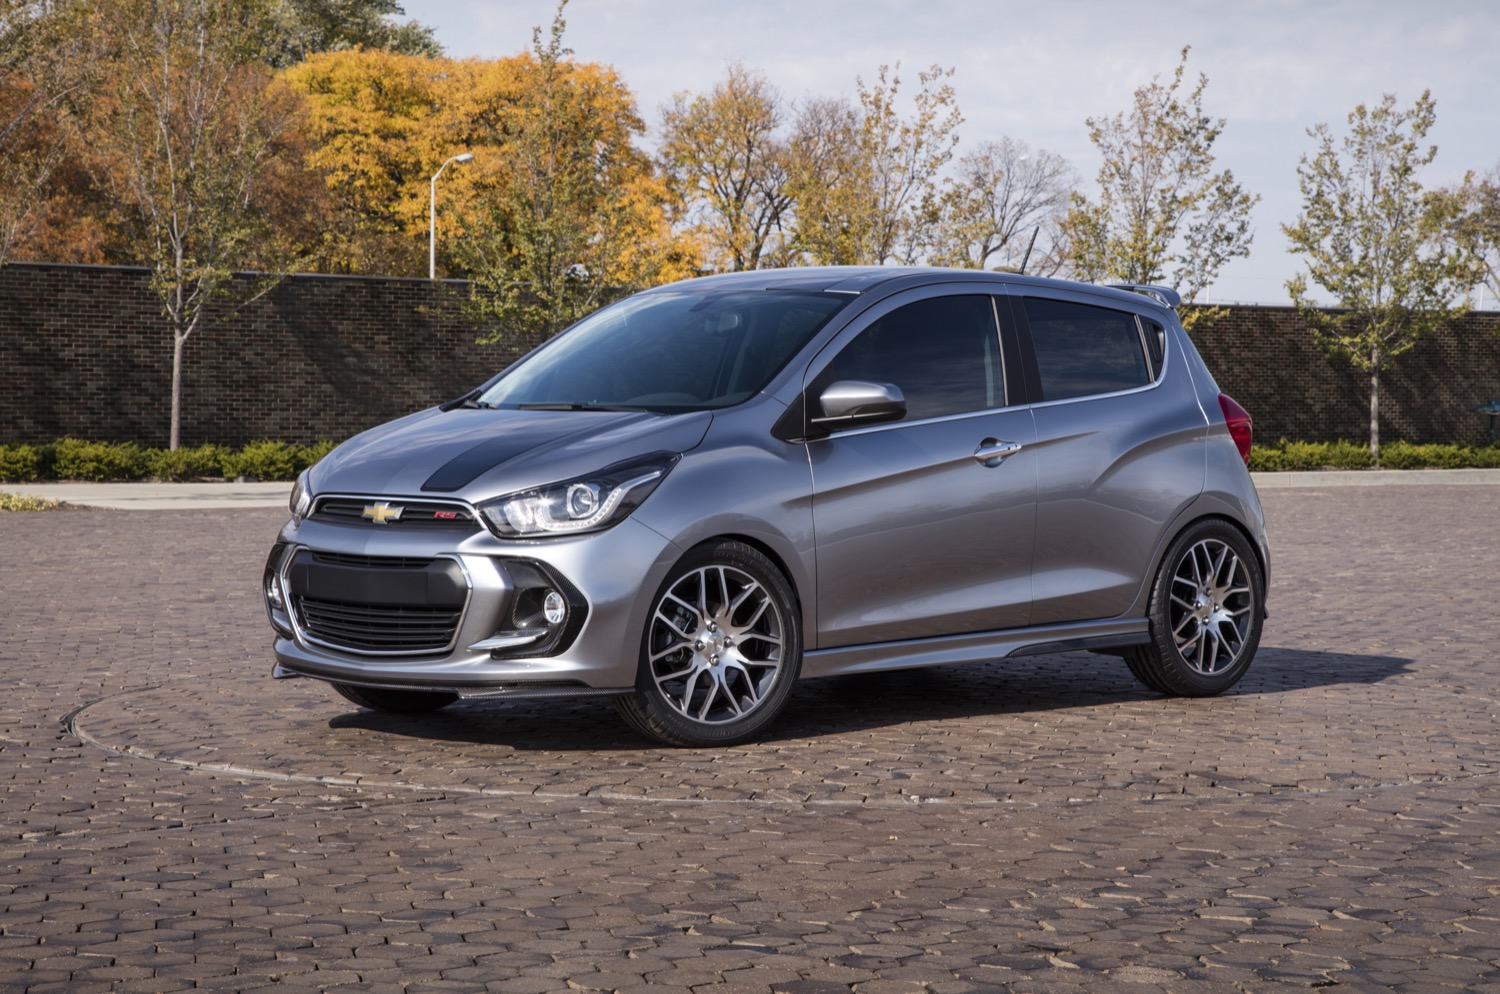 2016 Chevy Spark RS Concept Debut | GM Authority